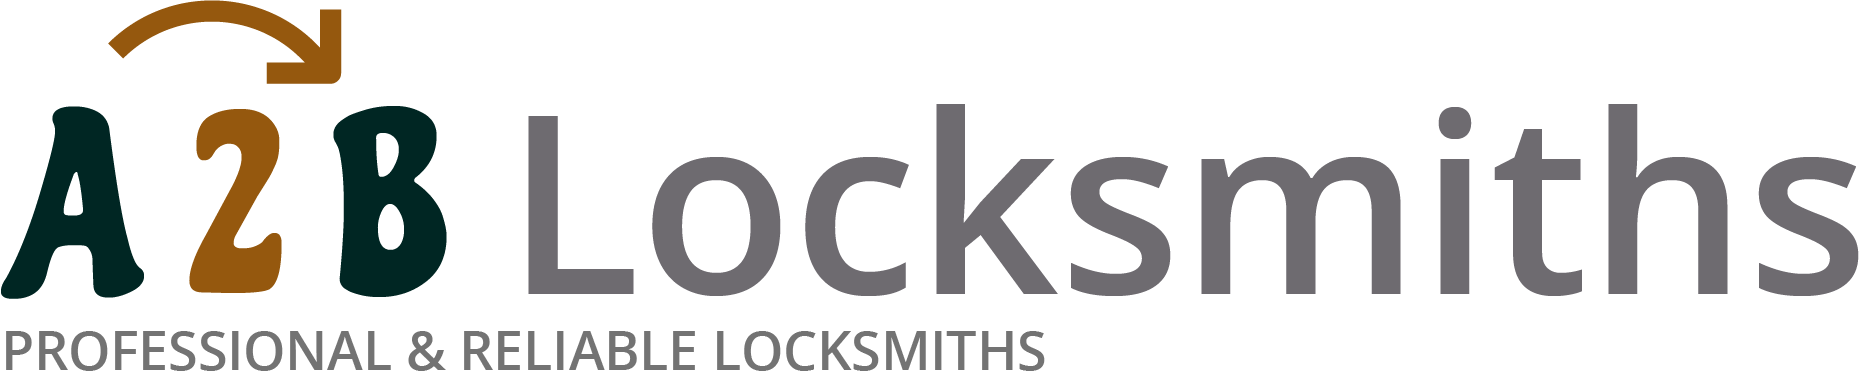 If you are locked out of house in Milnrow, our 24/7 local emergency locksmith services can help you.